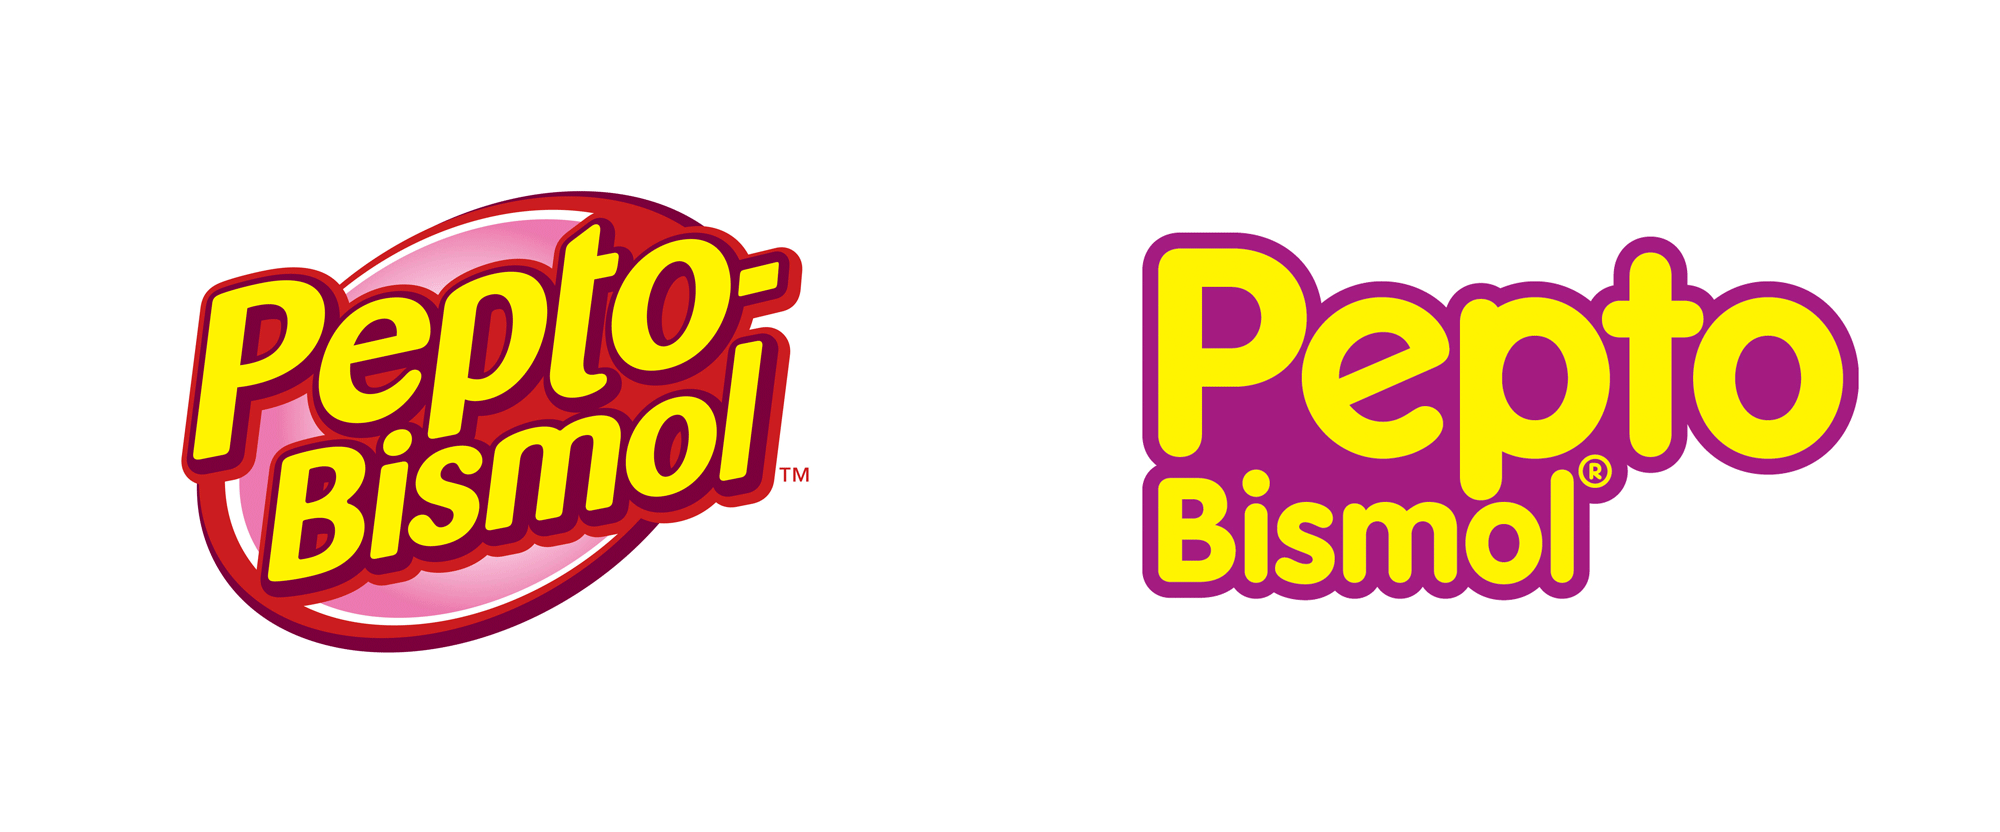 New Logo and Packaging for Pepto-Bismol